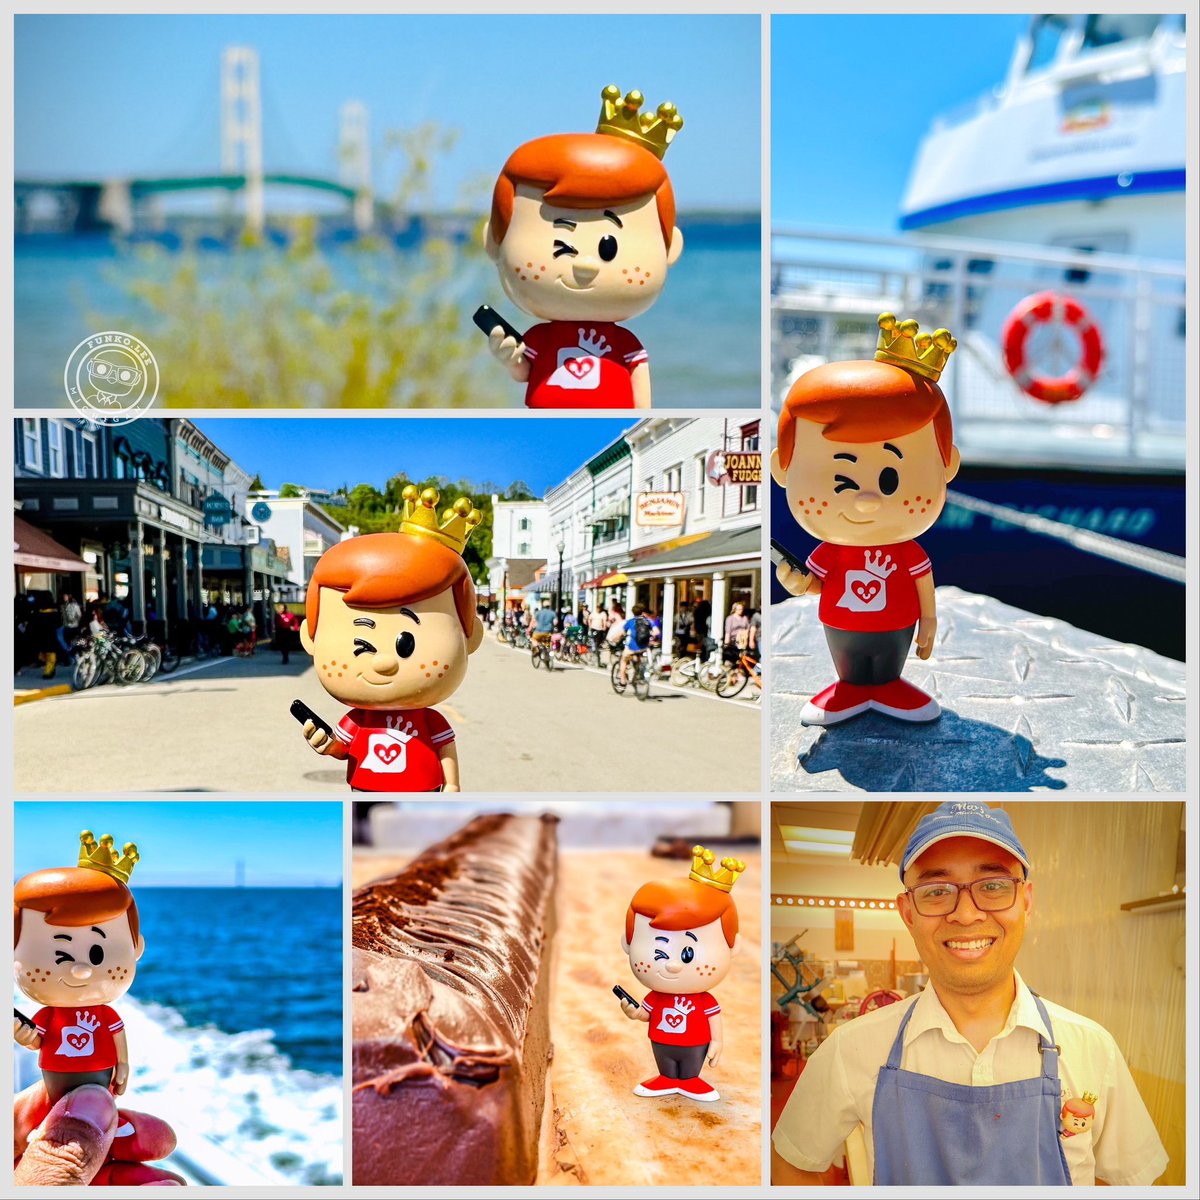 Had a blast taking #SMFreddy back to @mackinacisle in #FunkoSoda form! Highly recommend visiting the #MidWest & visiting #MackinacIsland! Hopefully you all had a #fun & enjoyable weekend with family & friends! 😄🏝️🍫 #Funko #Summer #FOTW #FunkoFanatic #FunkoFamily @OriginalFunko